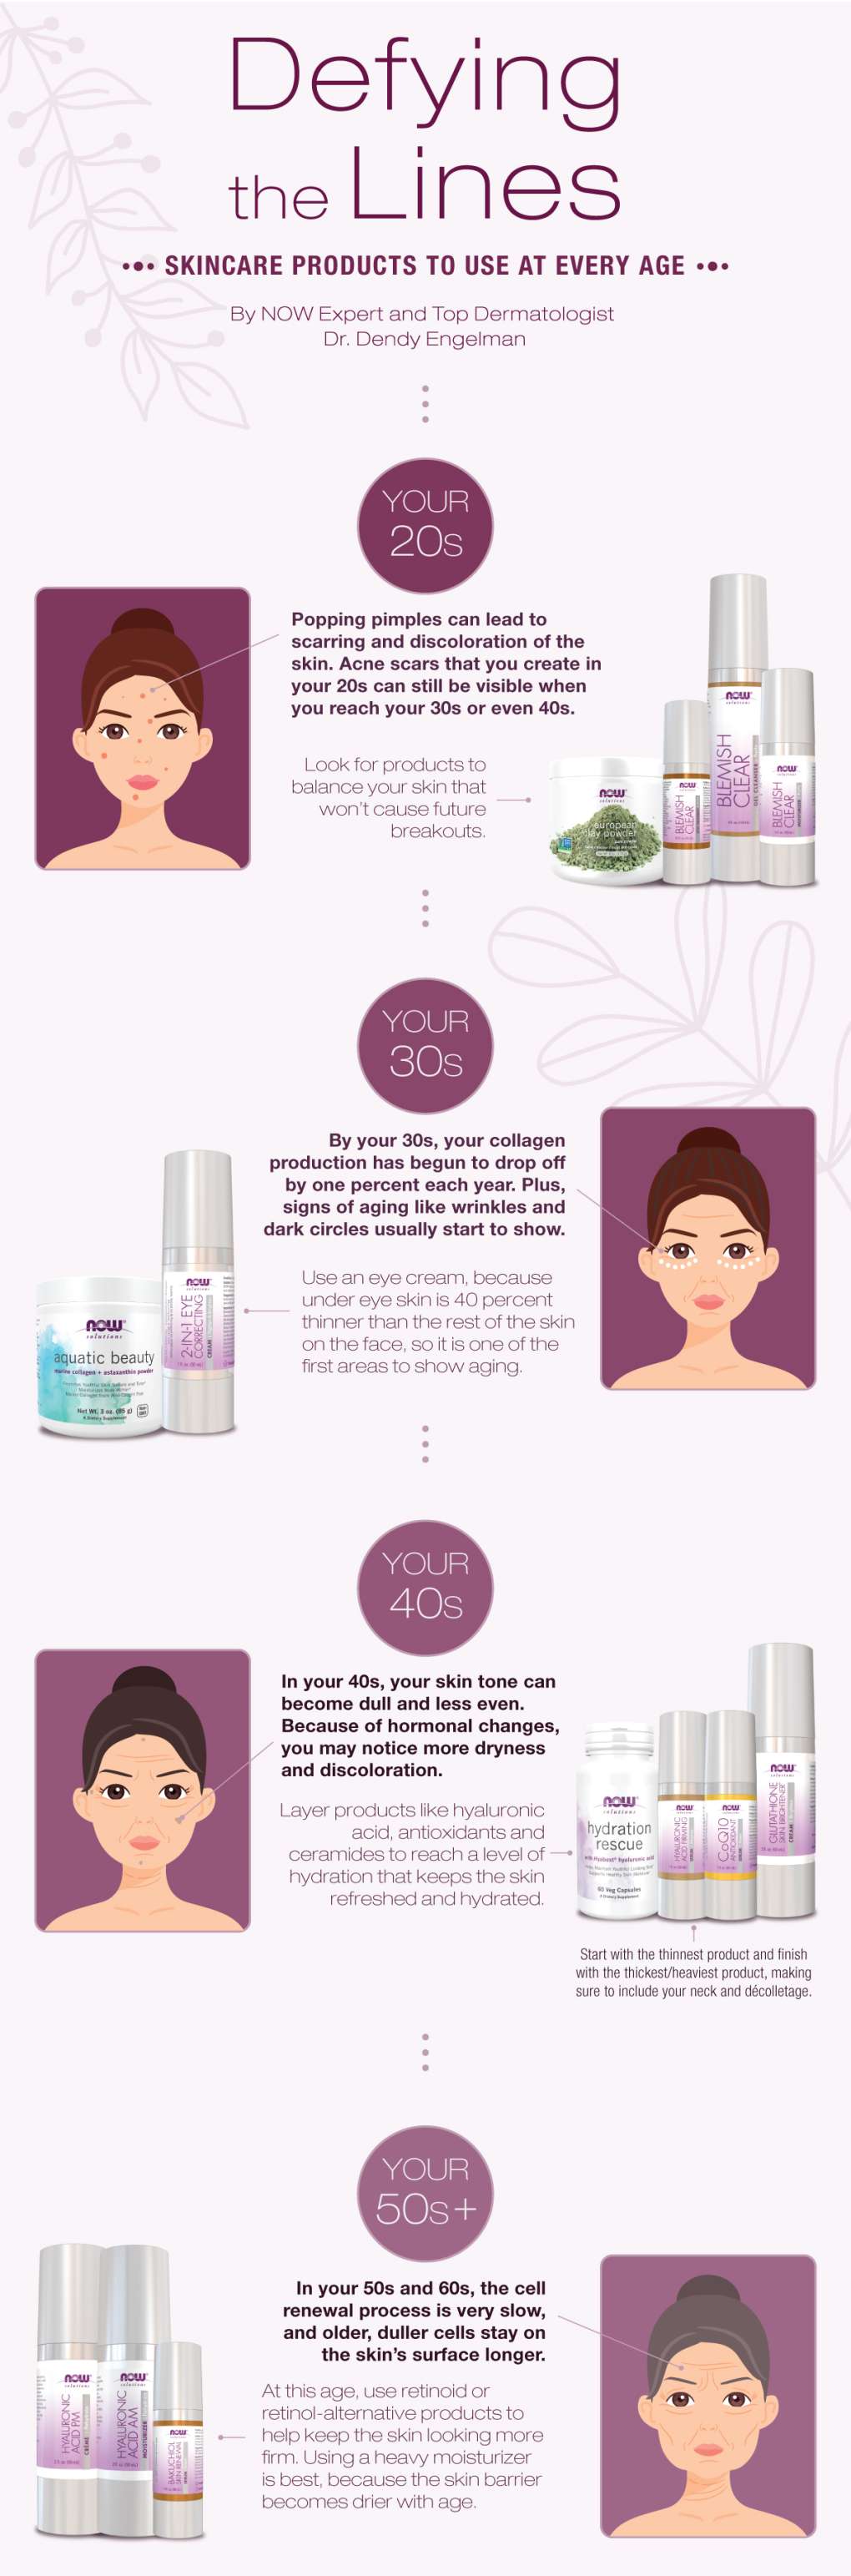 Defying the Lines - Products to use at every age infographic